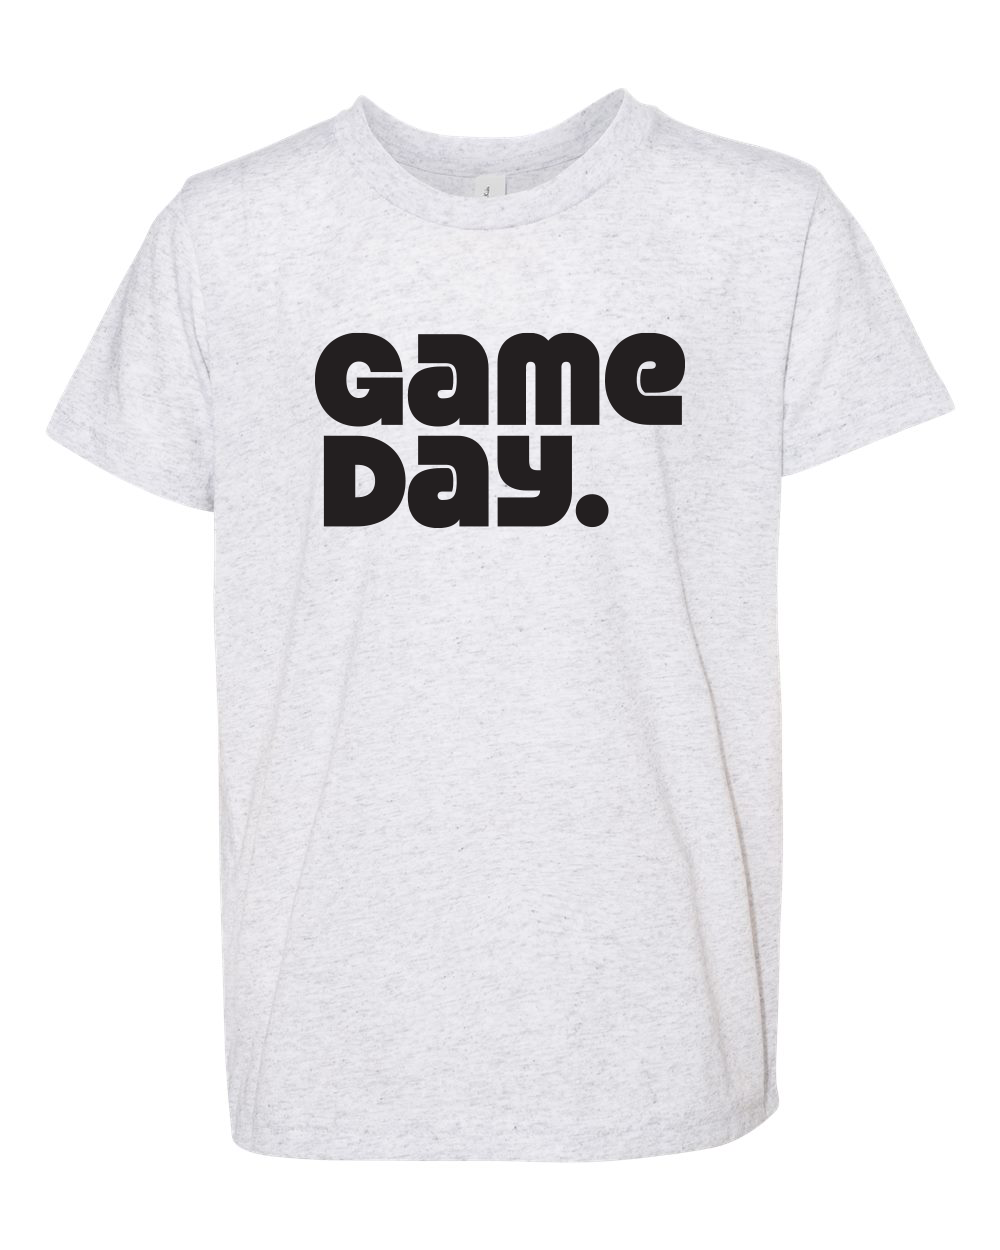 Graphic Tee - Game Day White/Black